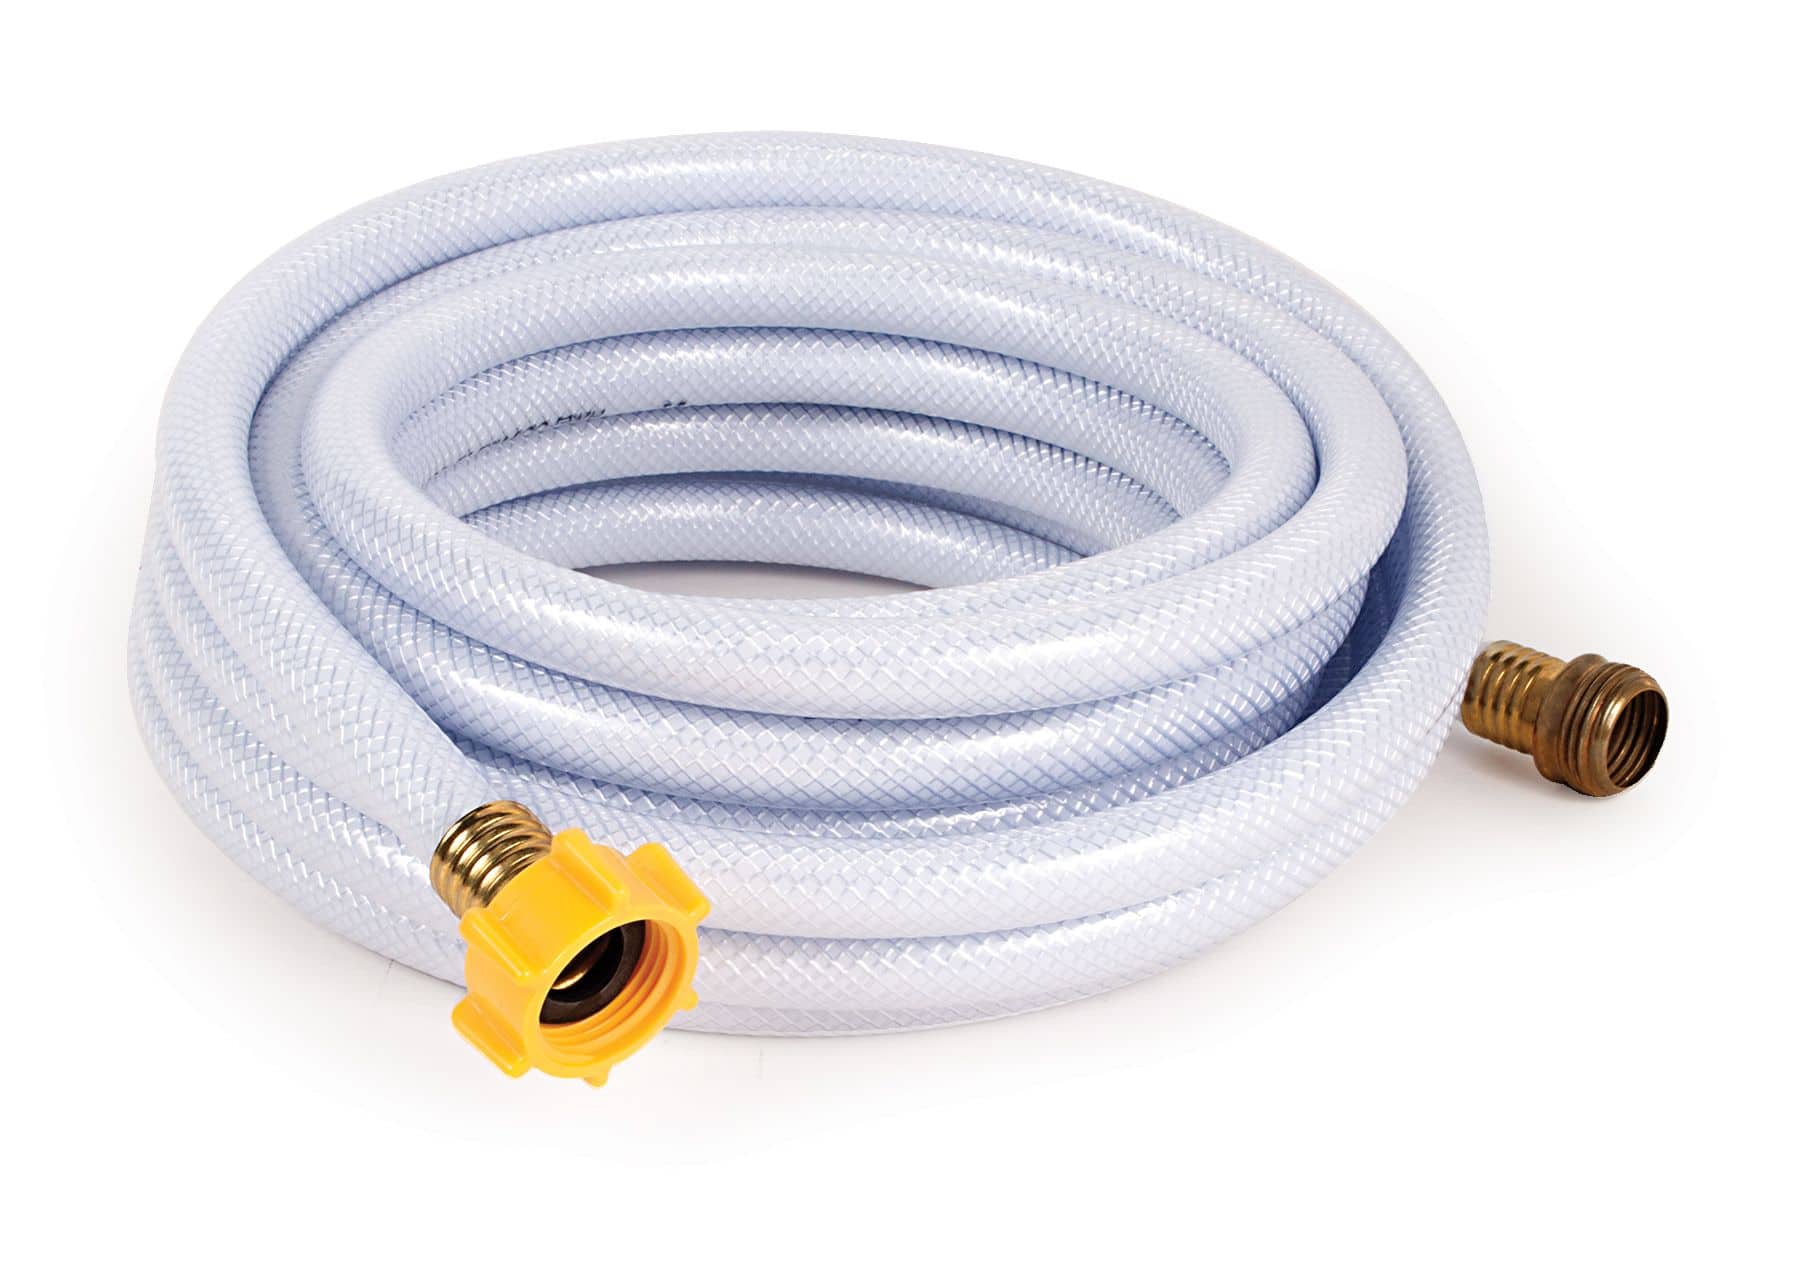 CAMCO 36170 Flexible RV Blow Out Hose with Ball Valve, 6-in